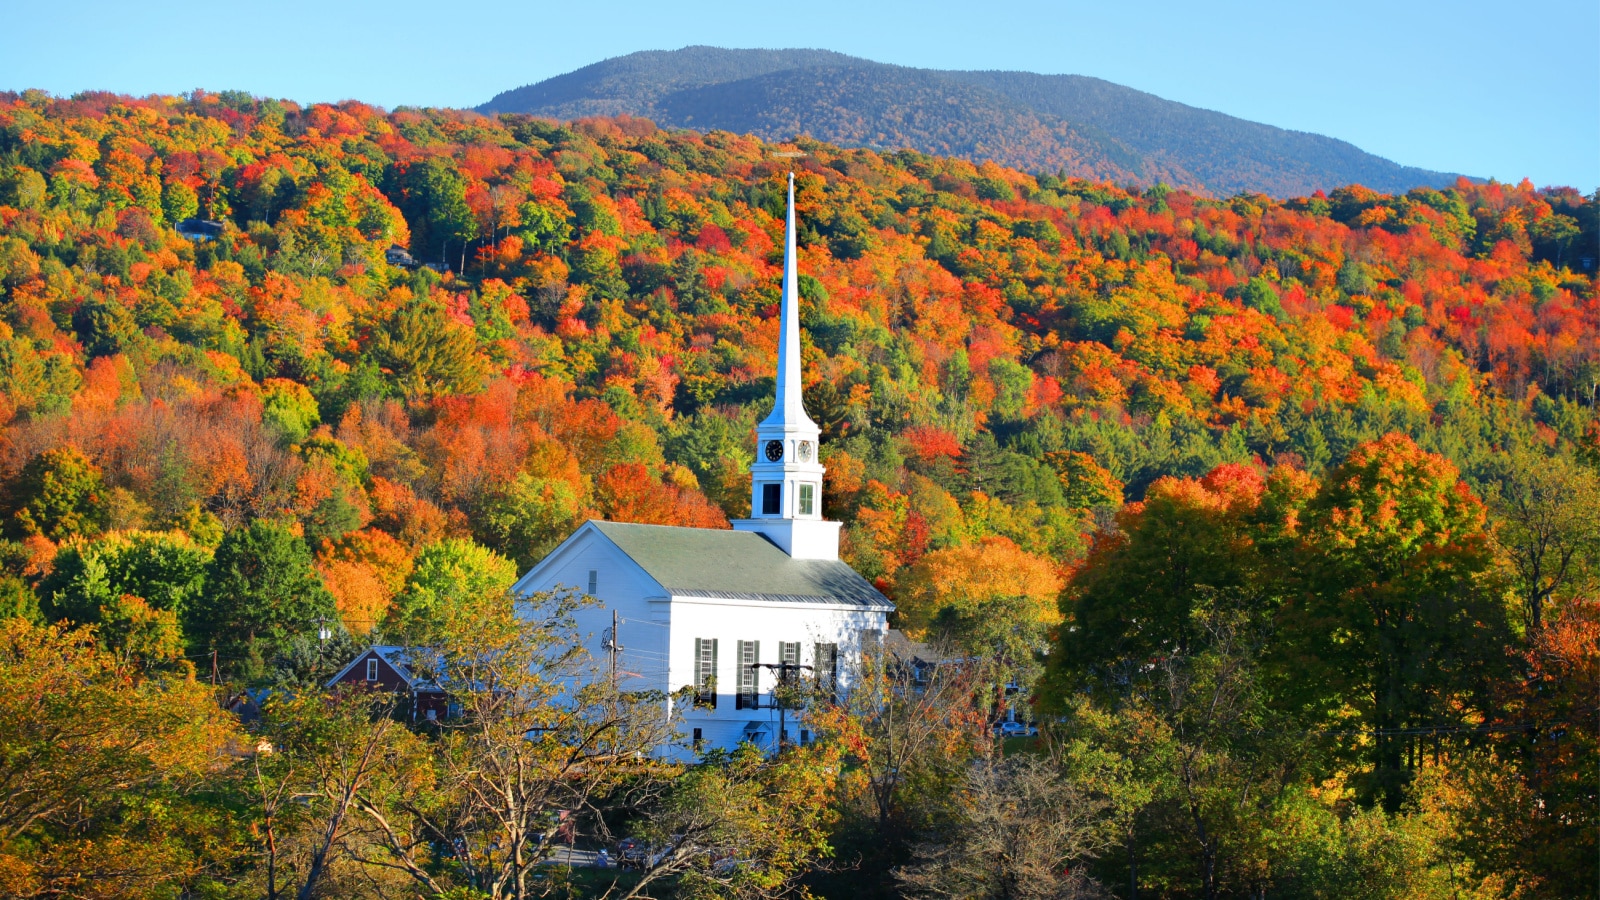 Iconic church in Stowe Vermont